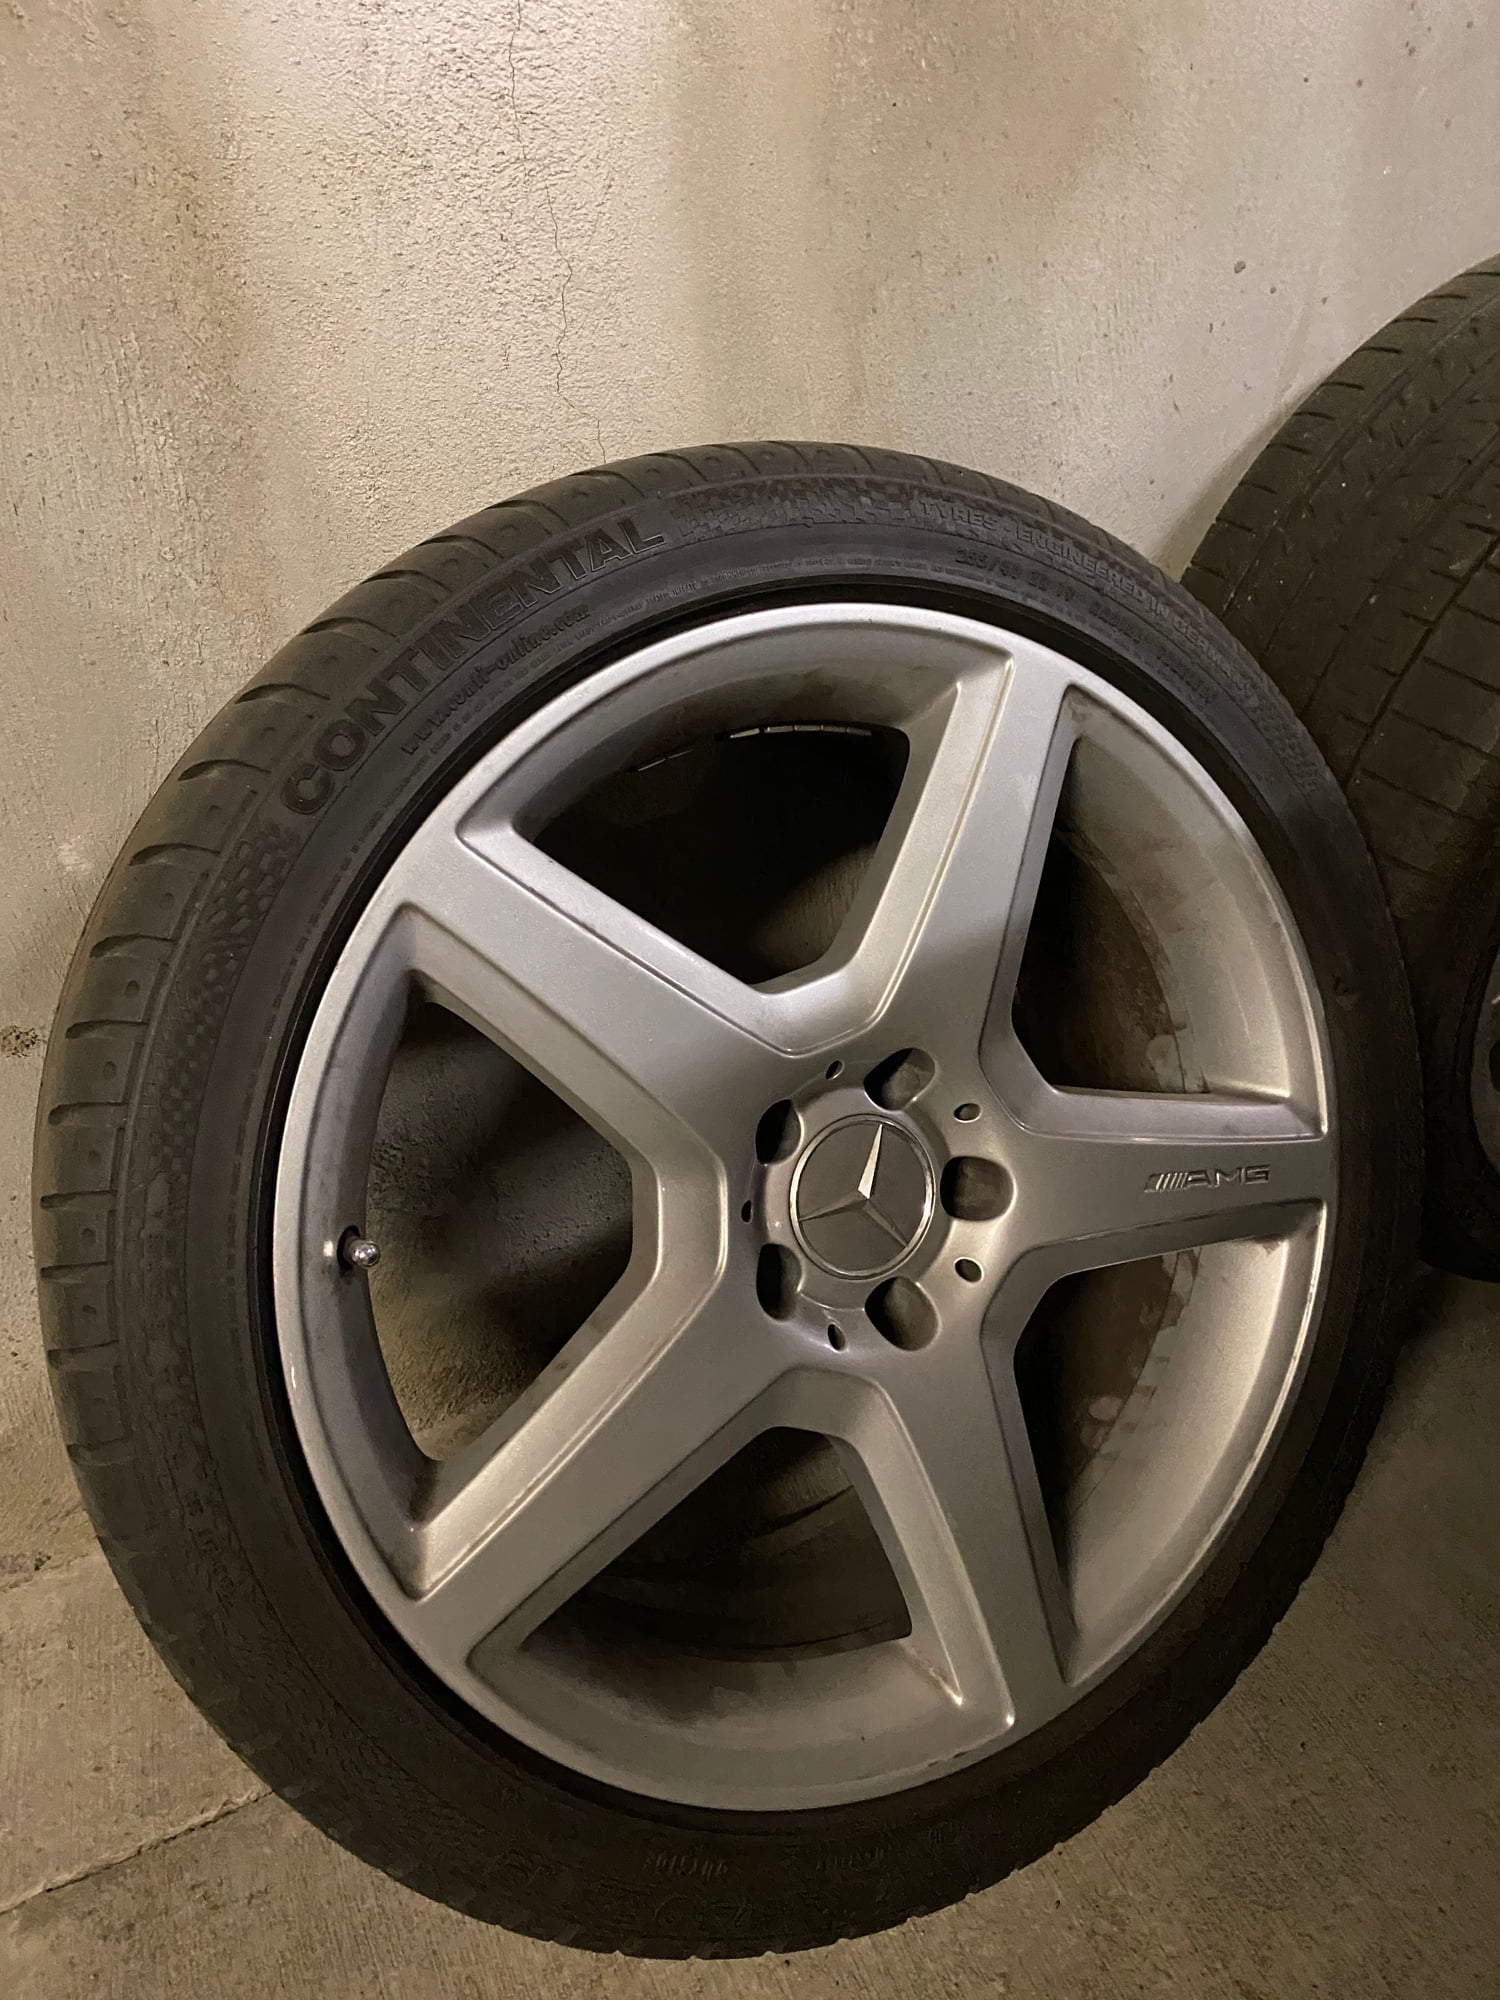 Wheels and Tires/Axles - 2 oem cls 55 wheels/tires for sale - individual or both - Used - Los Angeles, CA 90046, United States